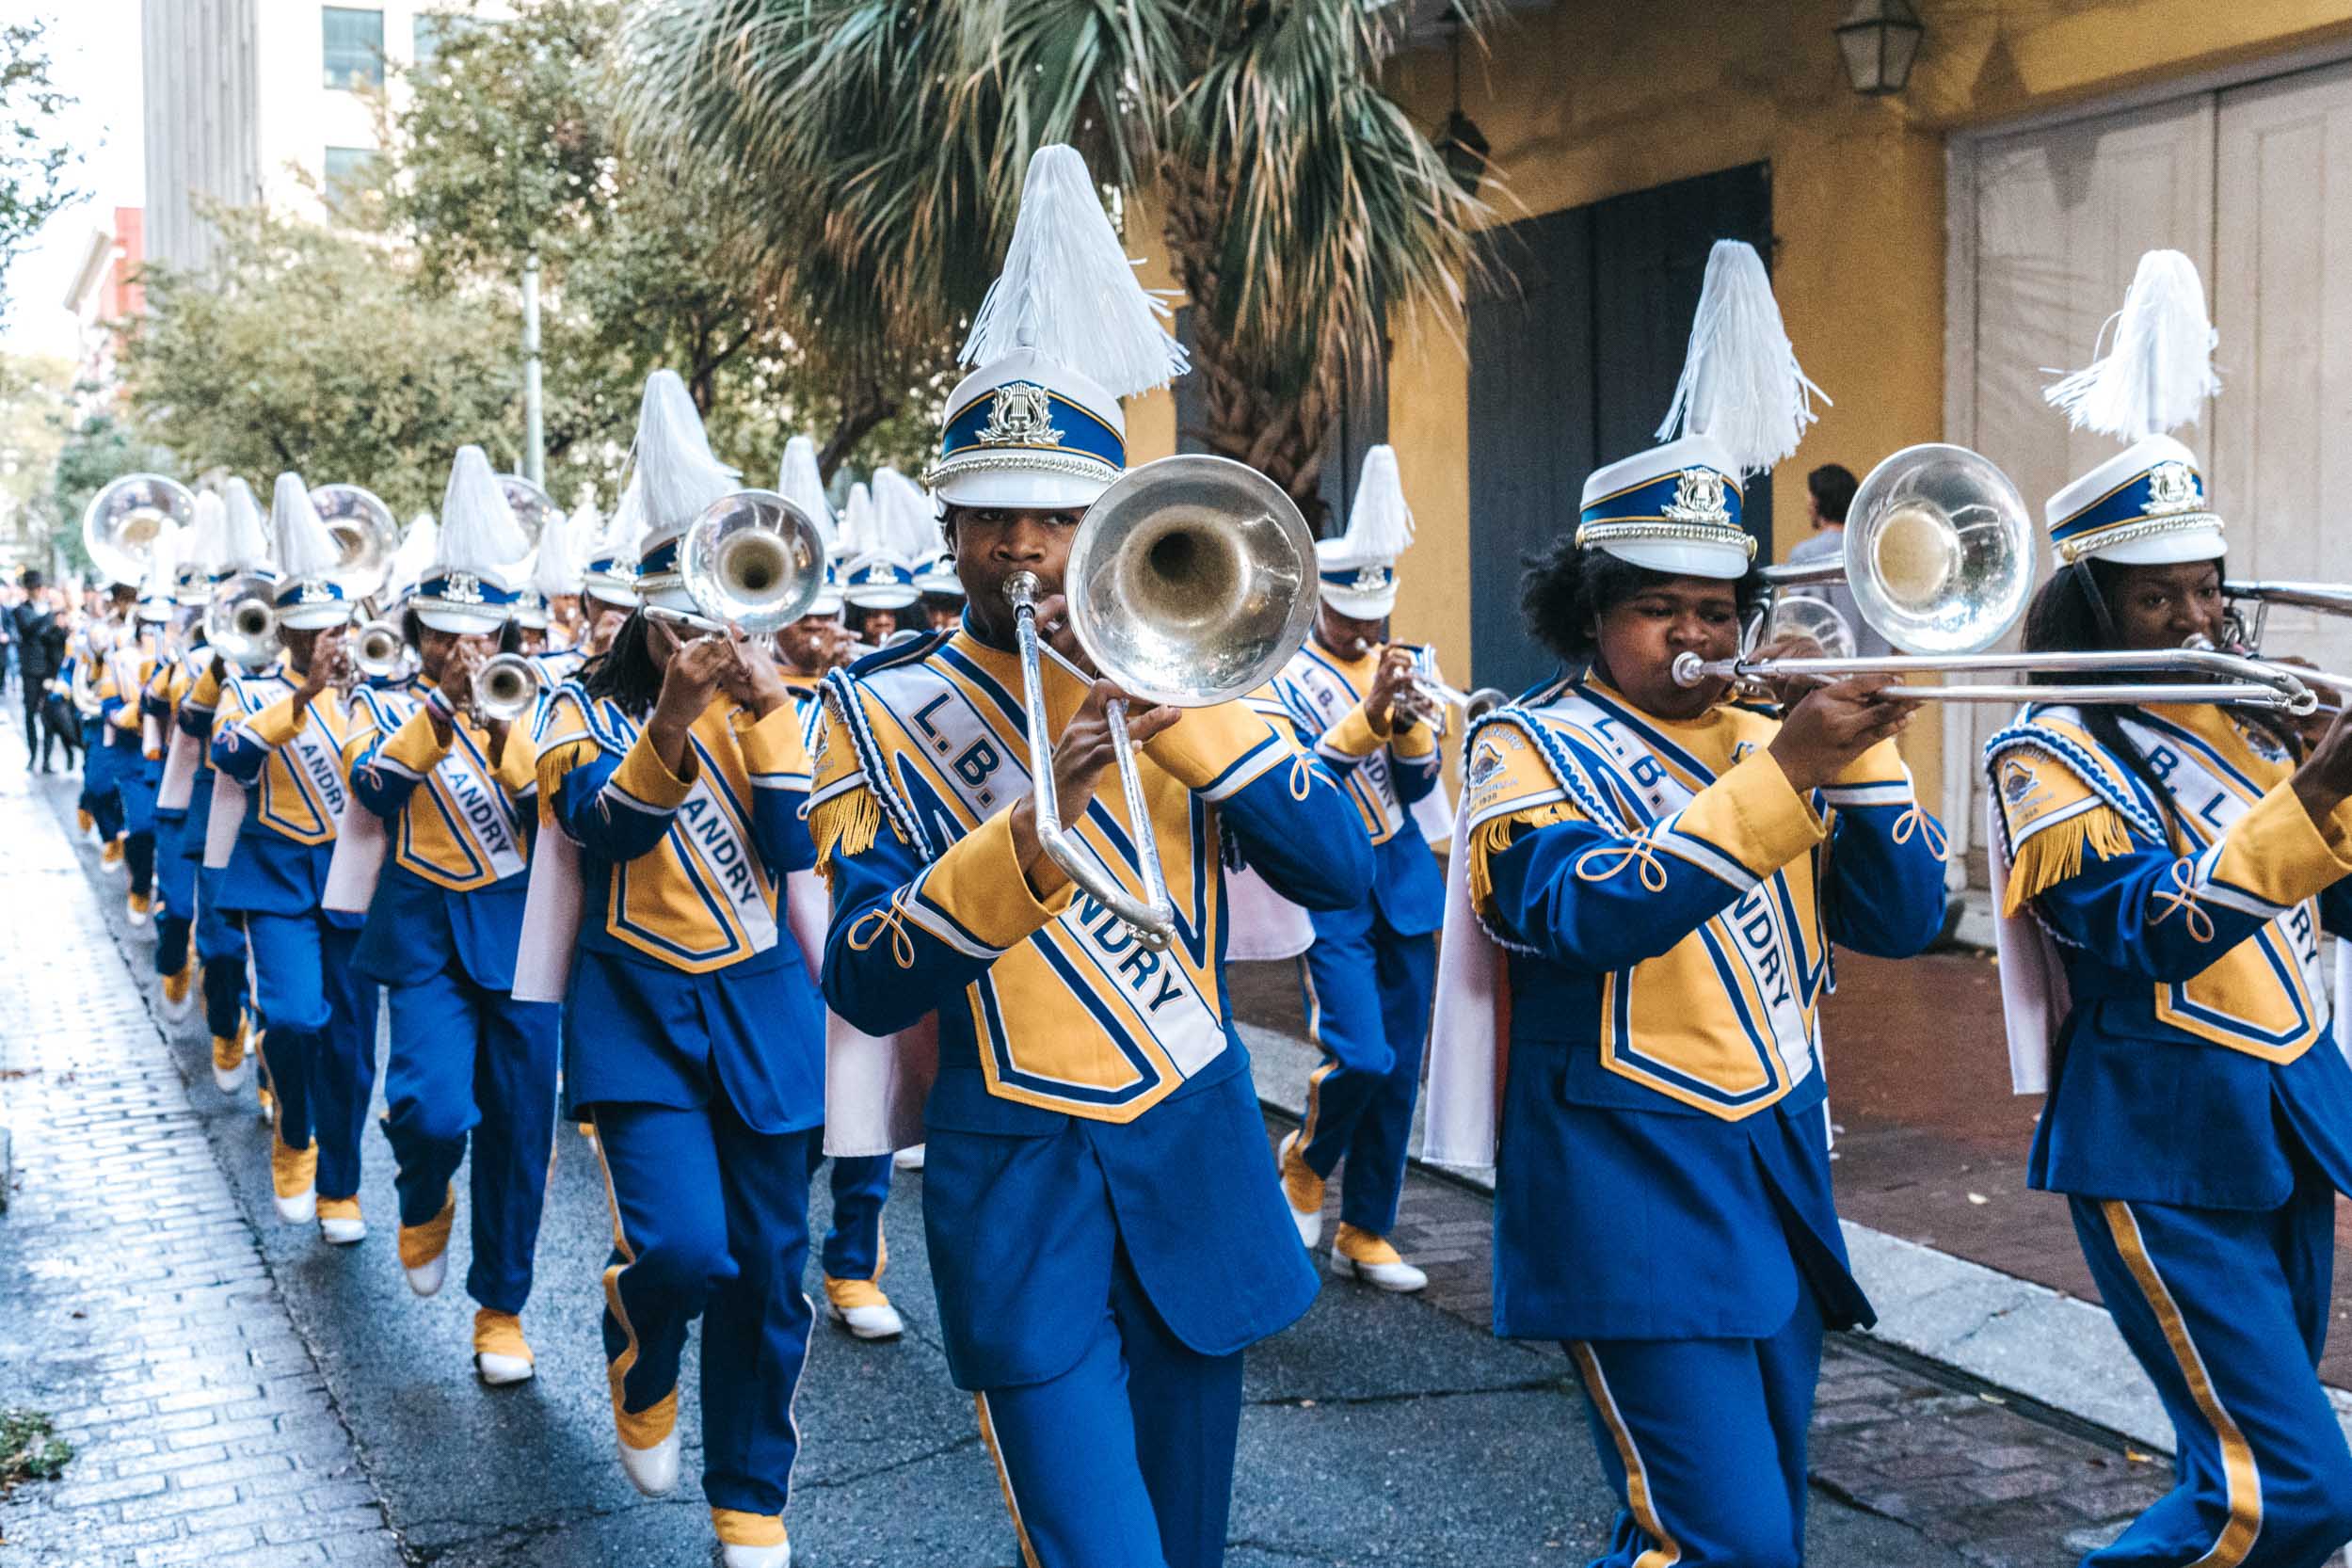 Band marching during wedding parade in French Quarter of New Orleans